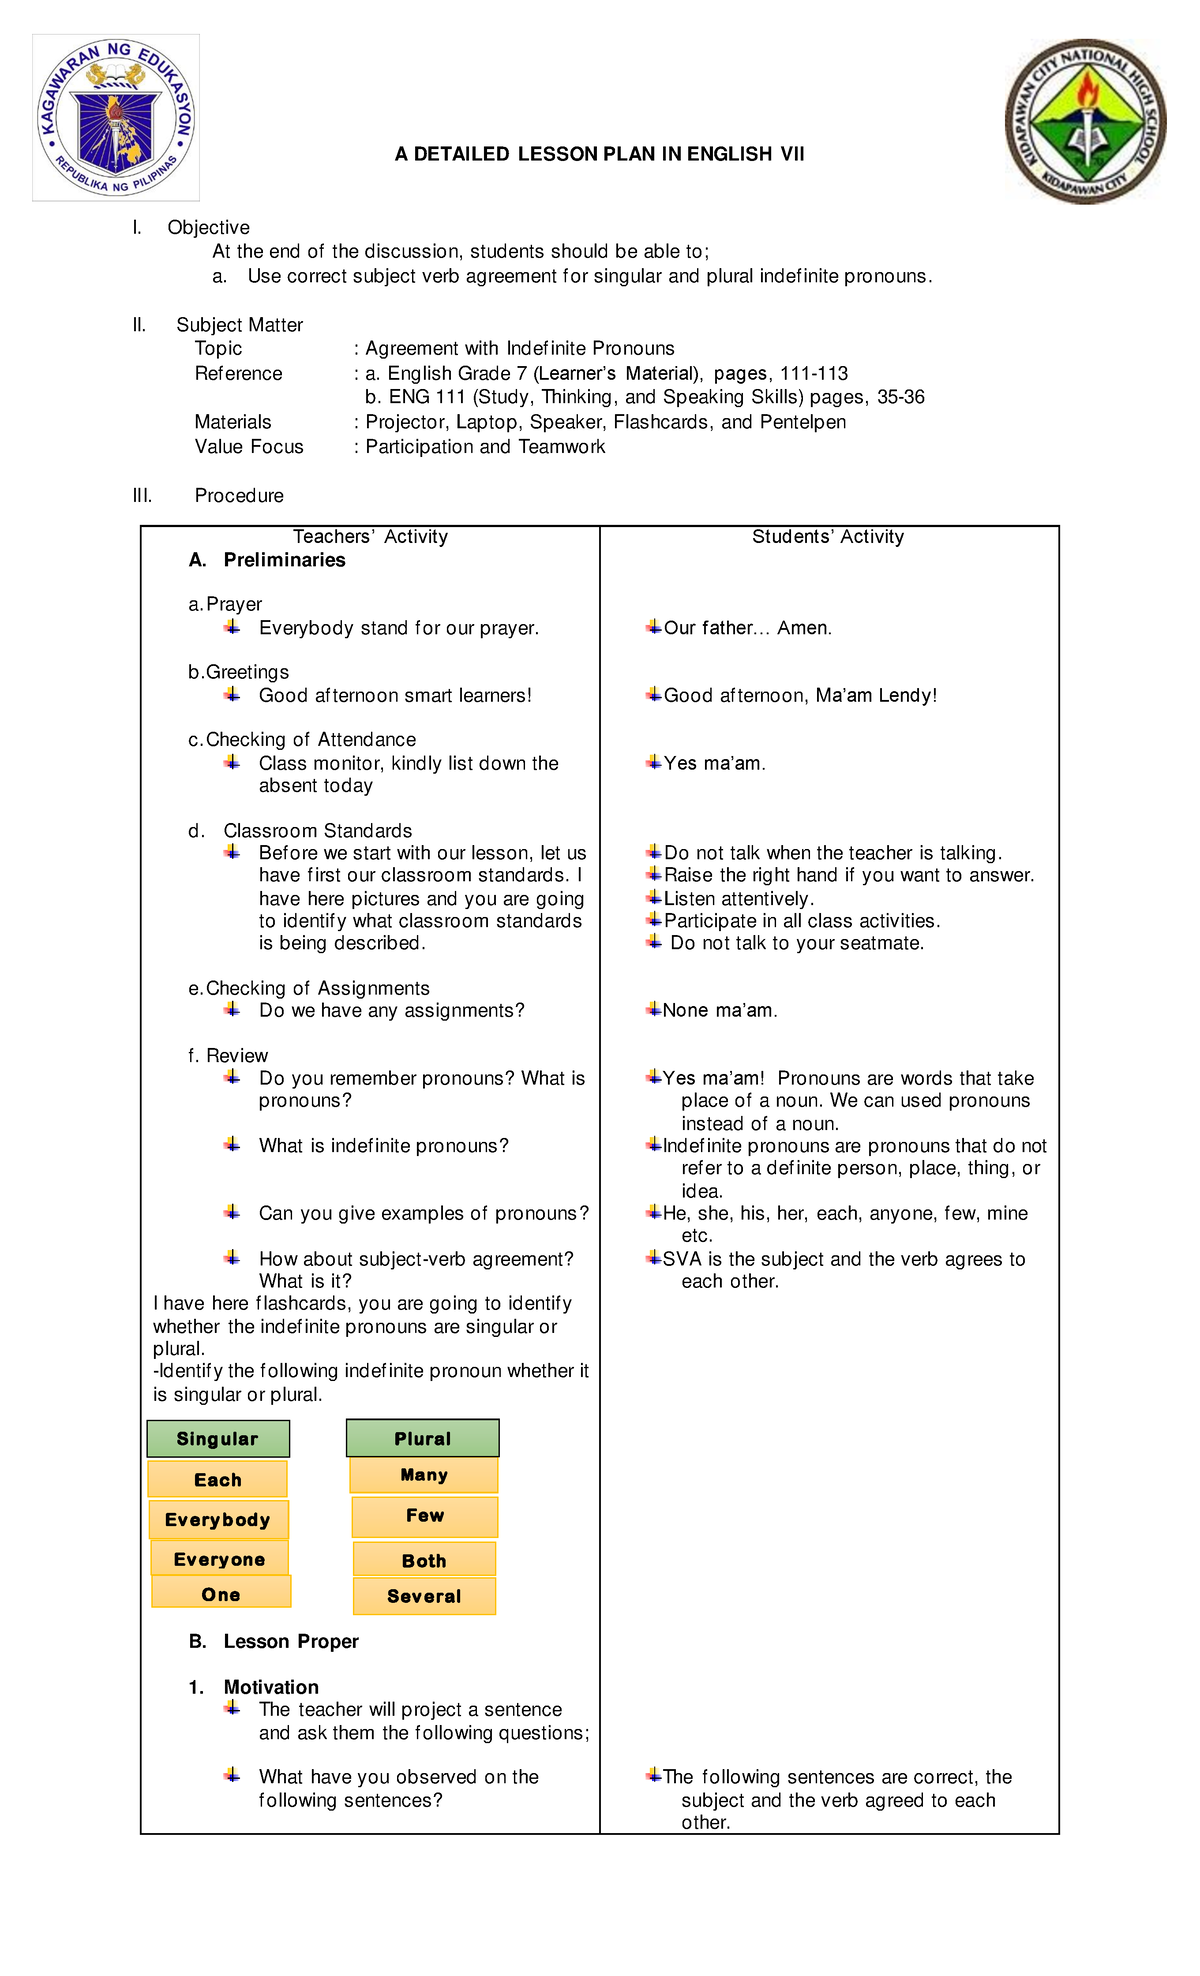 lesson-plan-indefinite-pronouns-a-detailed-lesson-plan-in-english